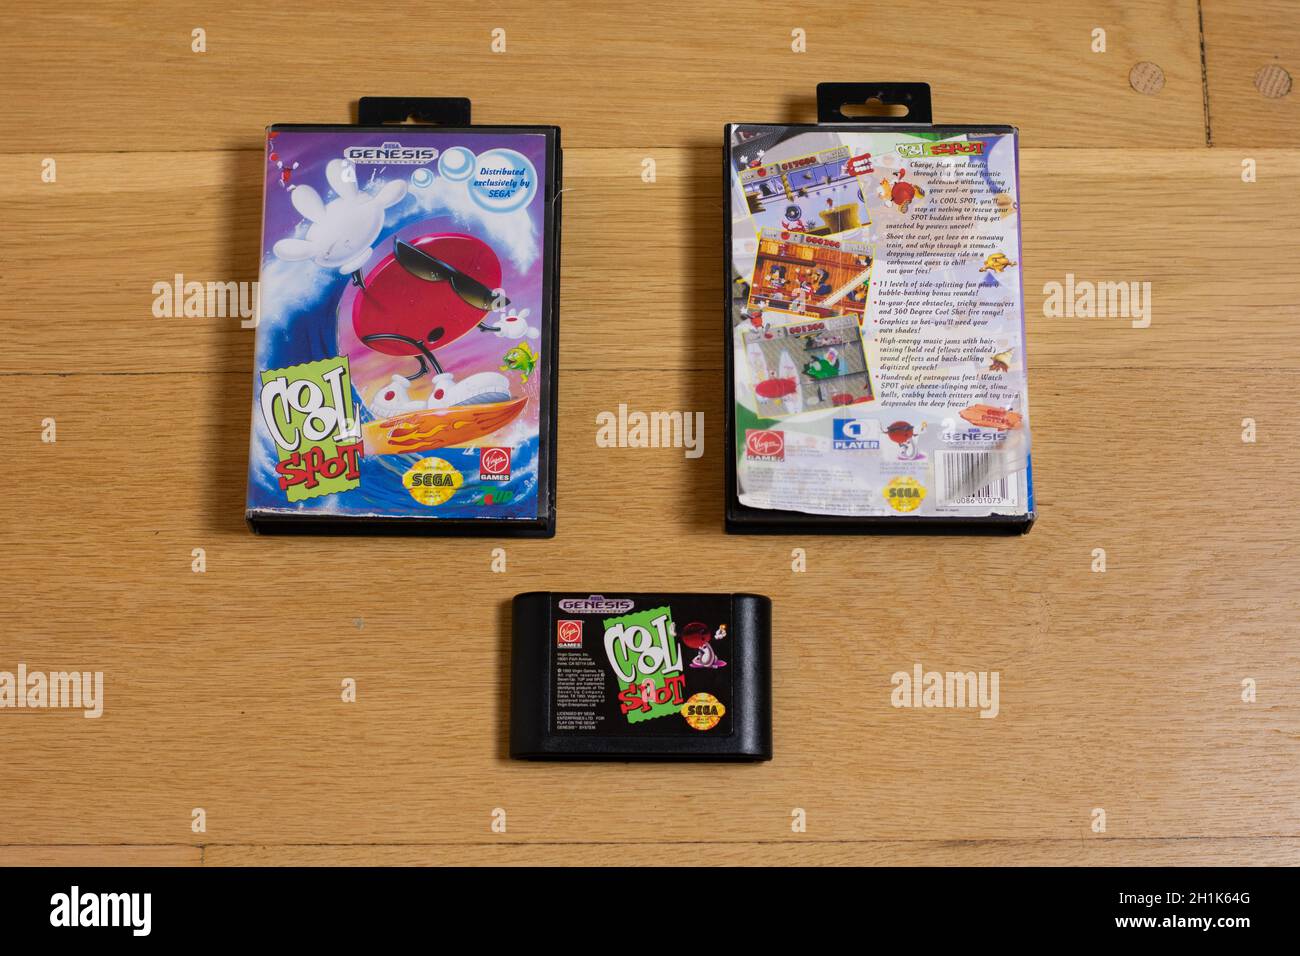 A Cool Spot Cartridge and Front and Back Of It's Game Case for the Sega Genesis on a wood floor. Stock Photo